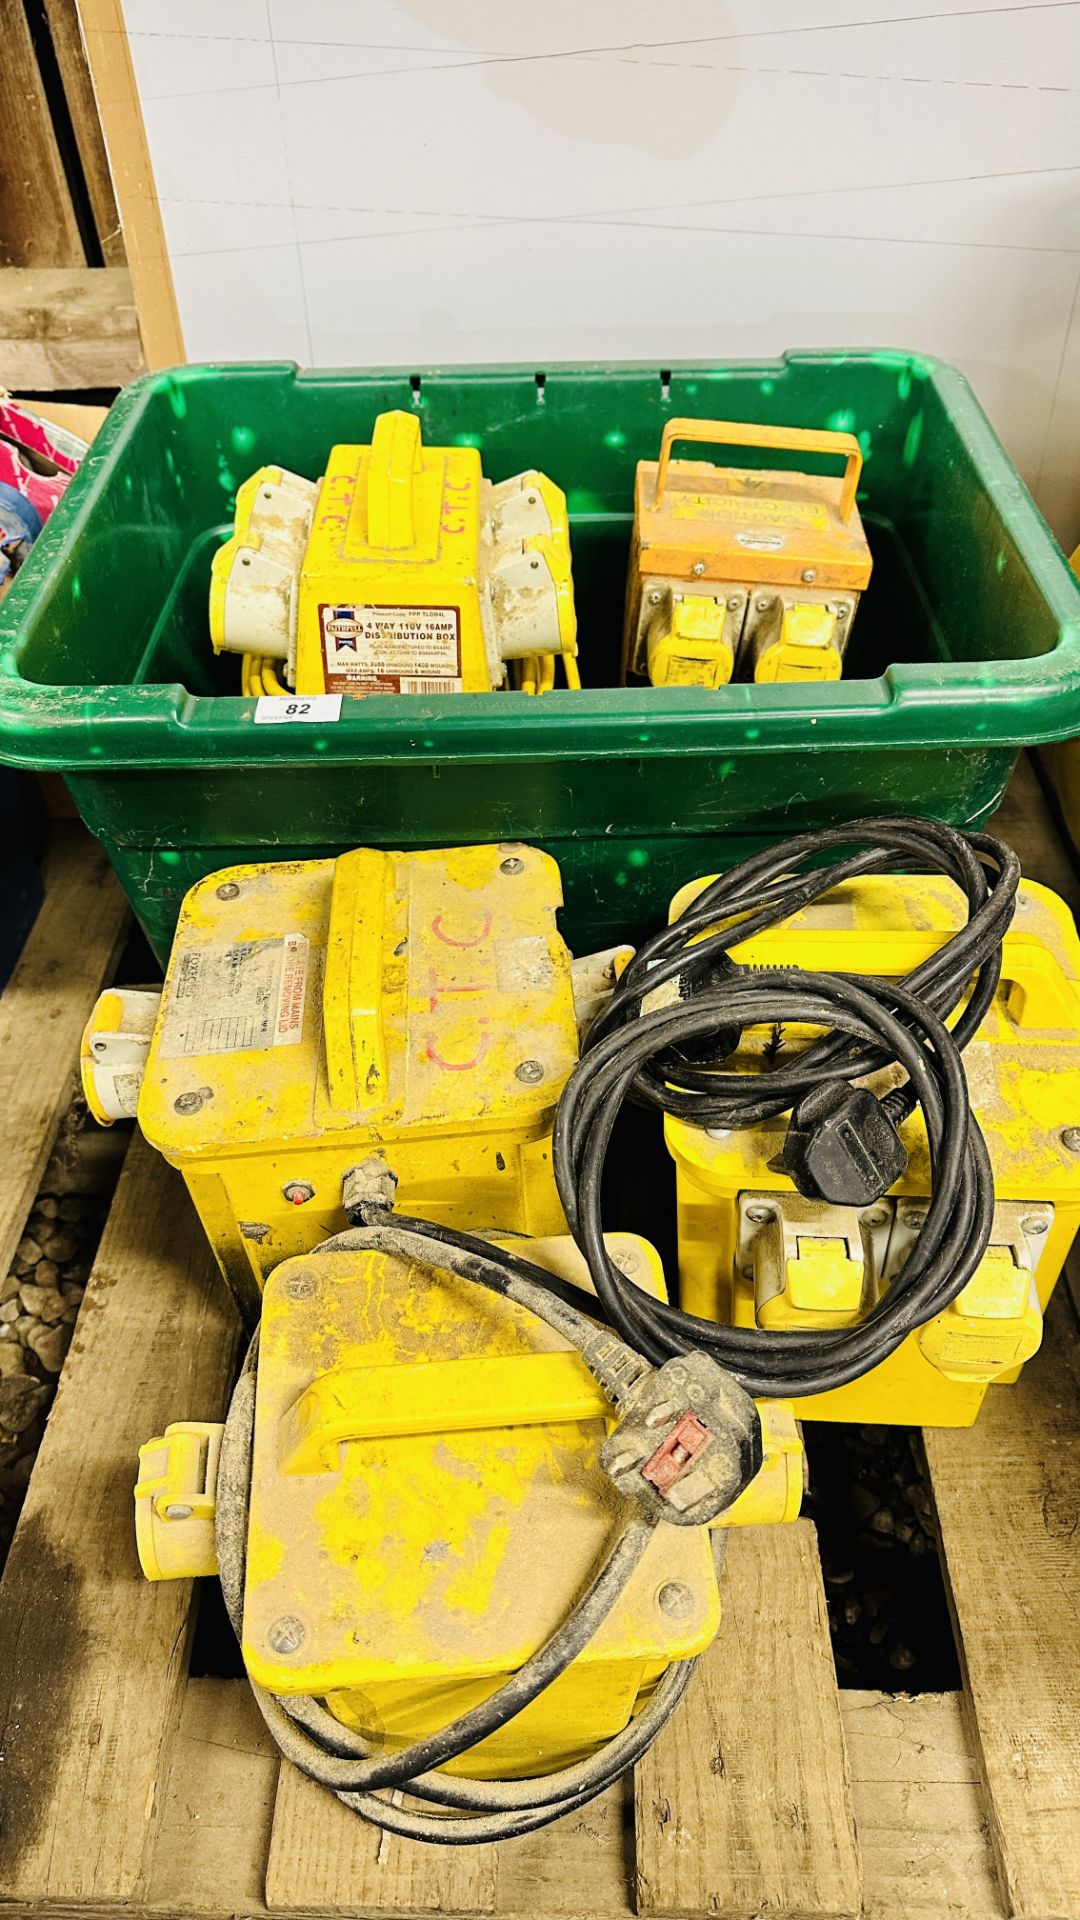 3 X 110 VOLT POWER TRANSFORMERS PLUS 2 JUNCTION BOXES & ASSORTED CABLES - TRADE ONLY.